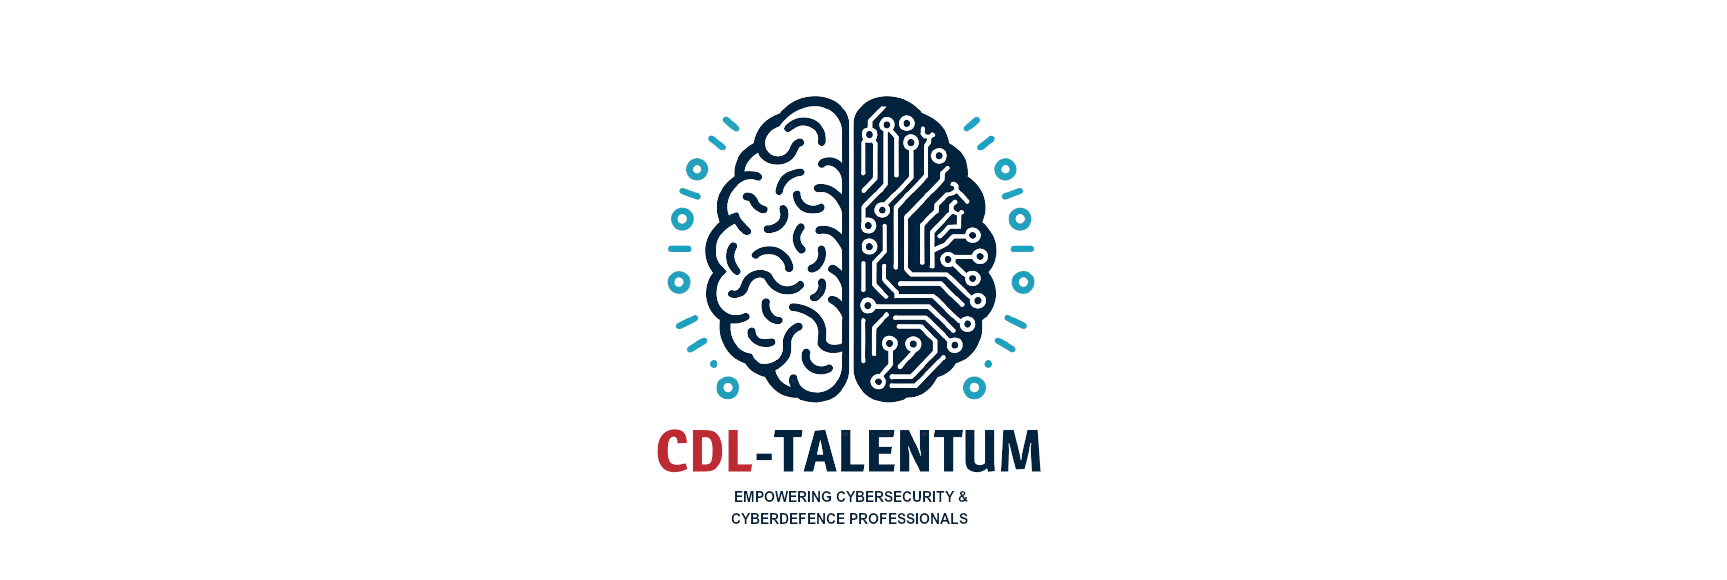 CDL-TALENTUM: Empowering professionals and researchers in cybersecurity, cyberdefence and data science